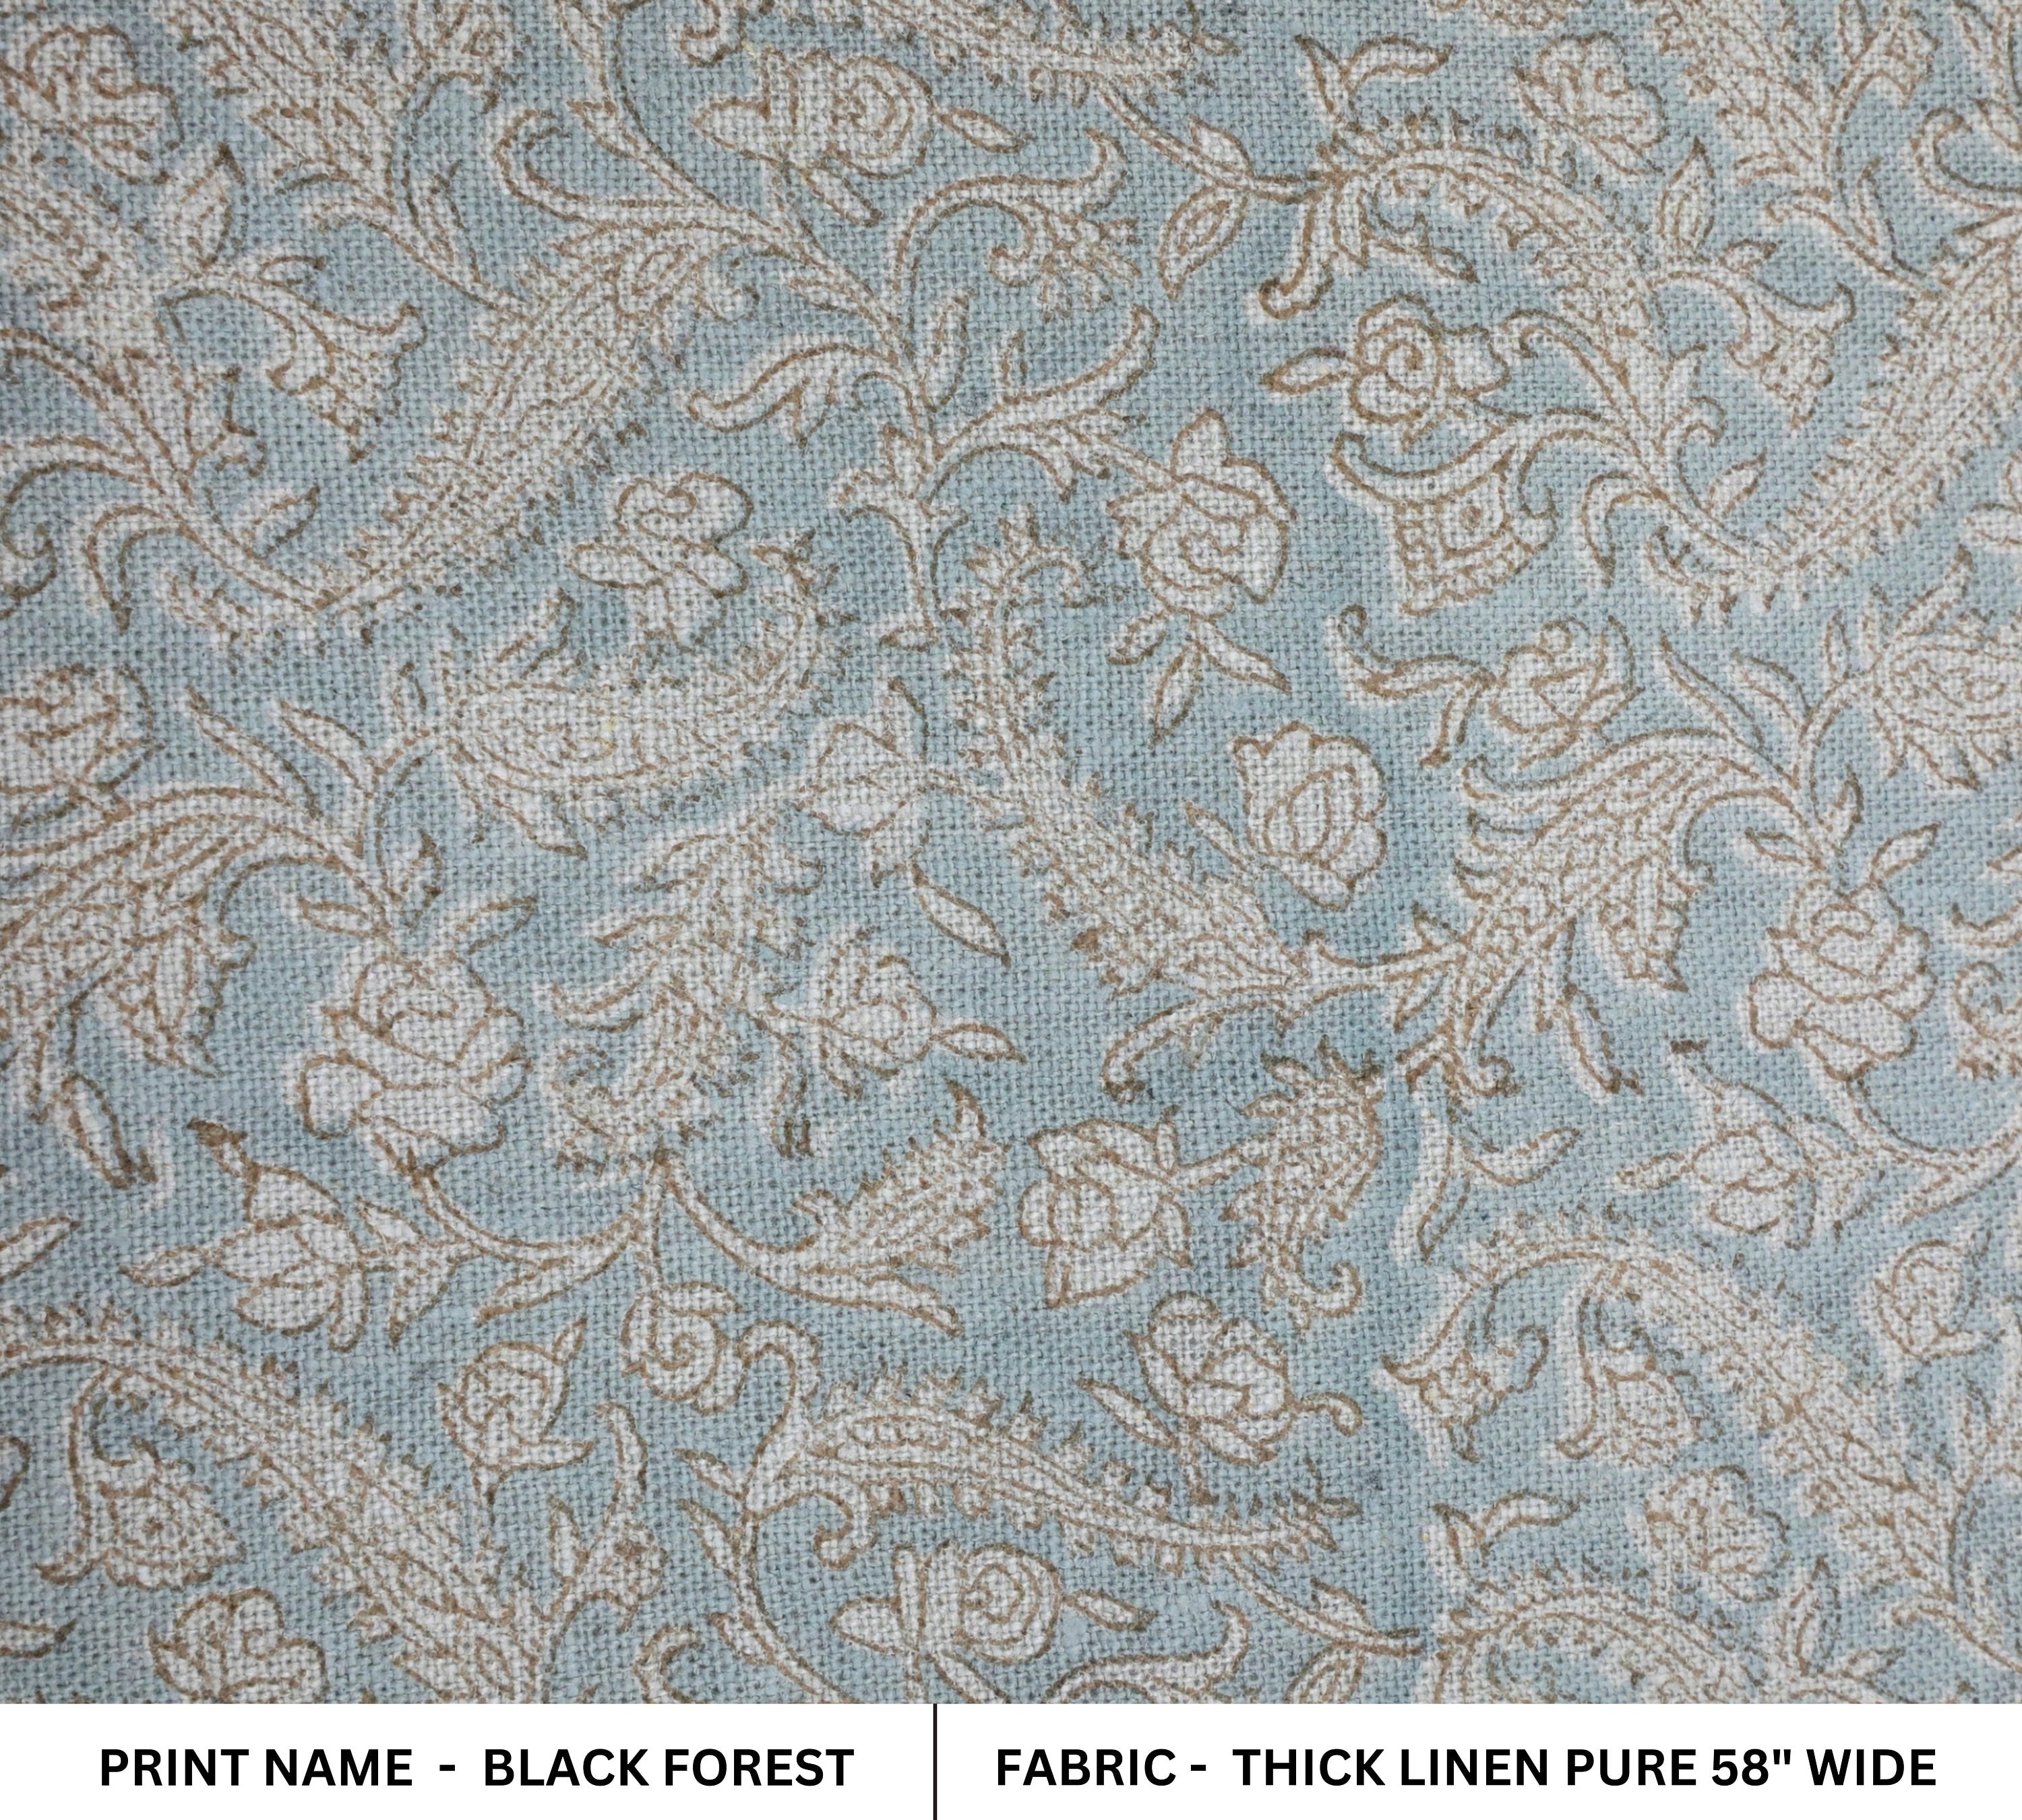 Thick linen pure 58" wide, floral linen fabric, printed fabric, upholstery for couch cushion cover - BLACK FOREST